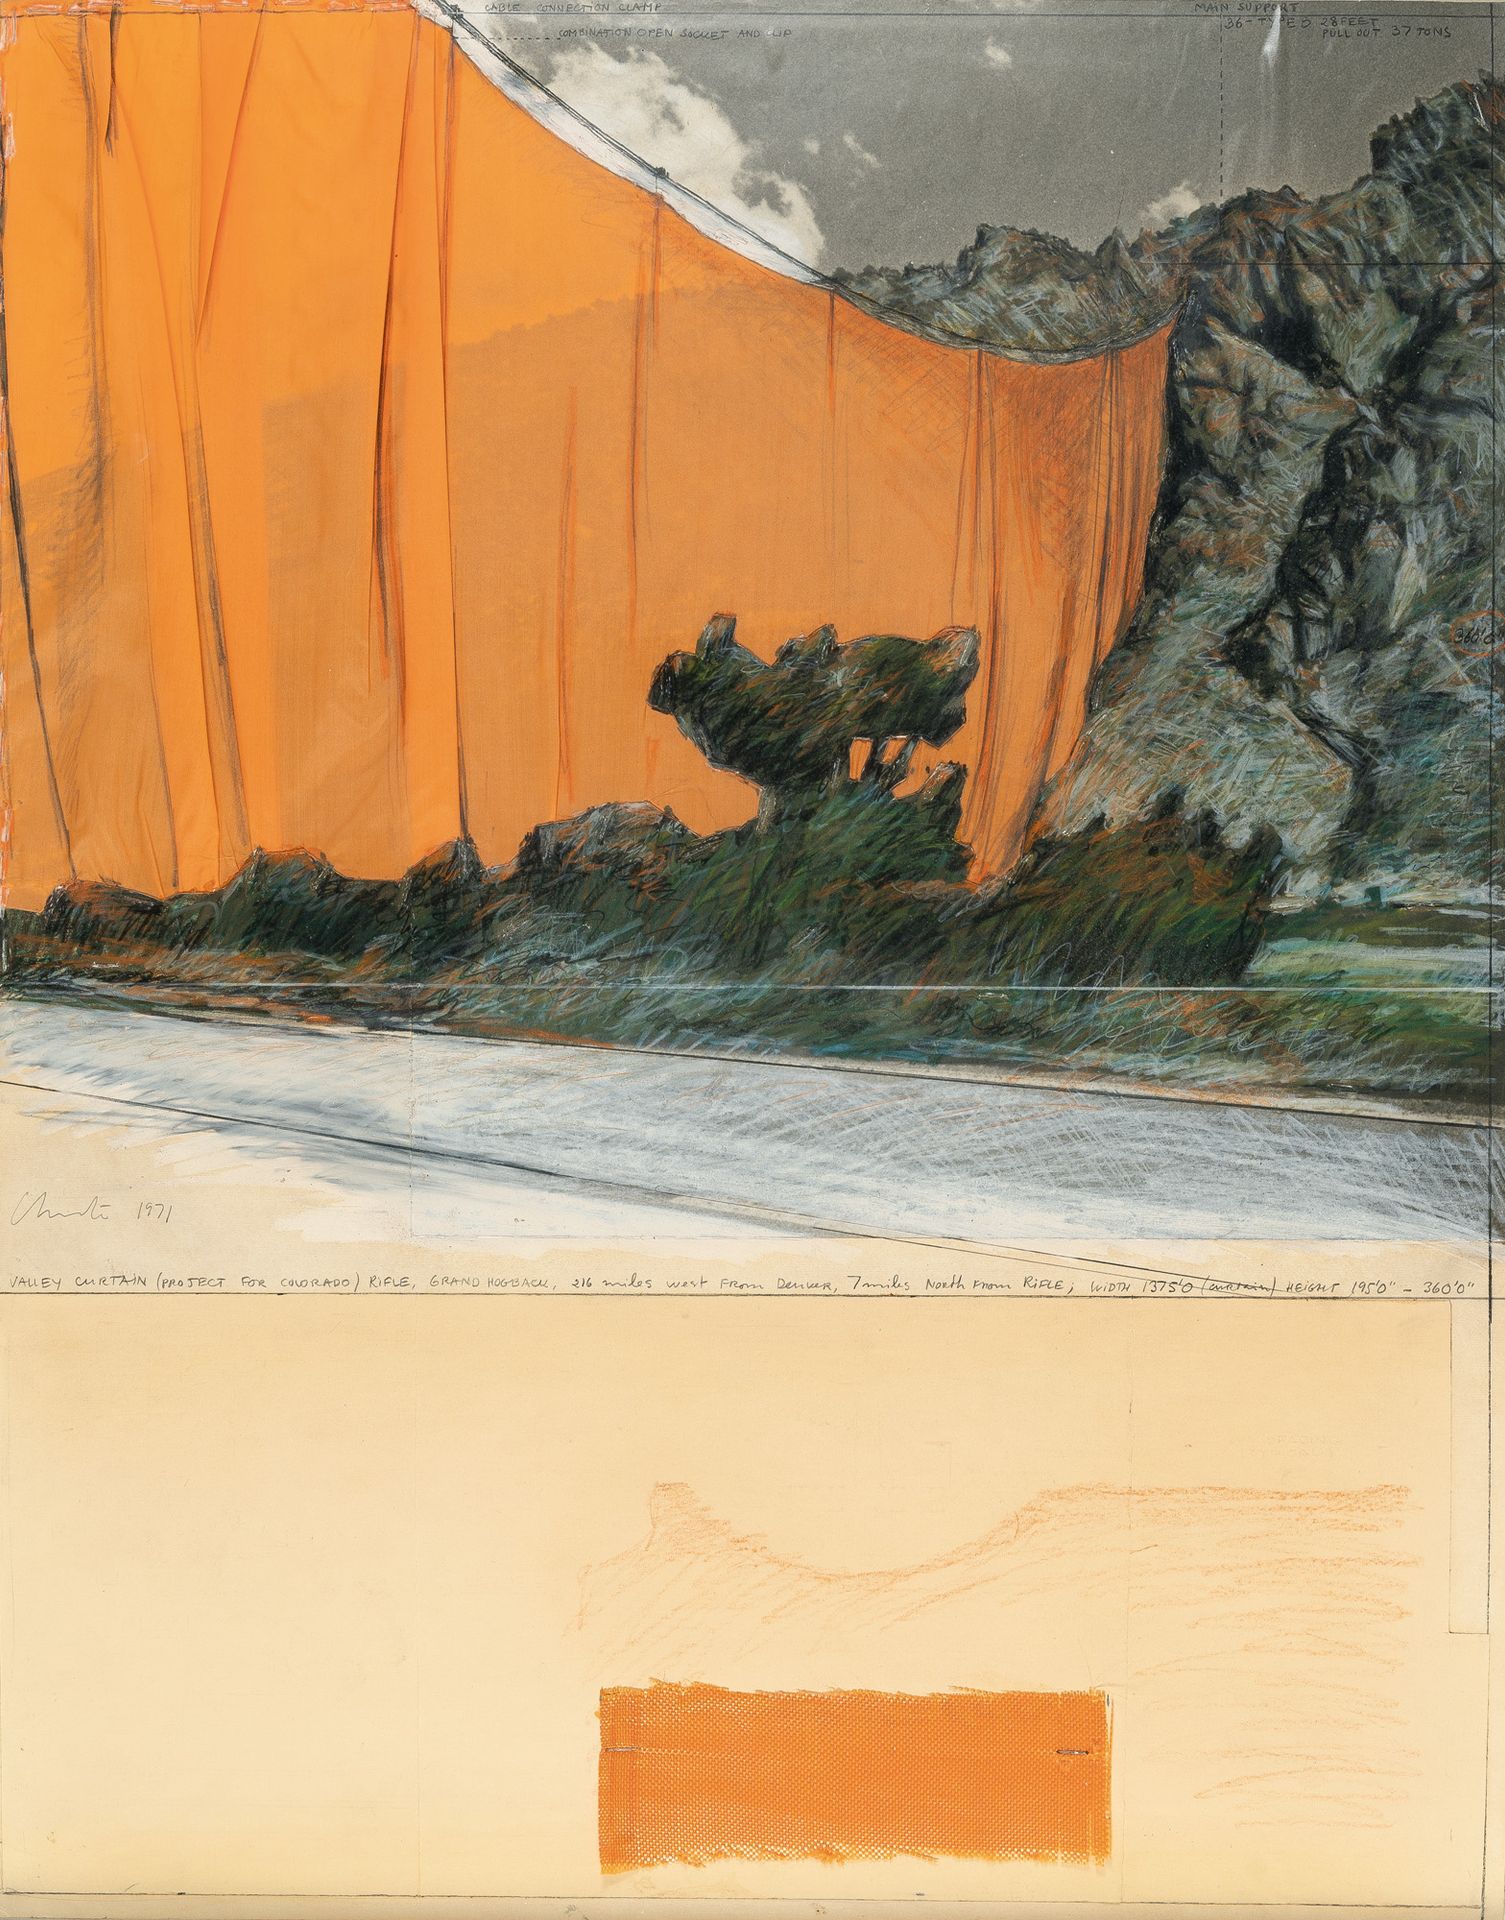 Christo und Jeanne-Claude Christo e Jeanne-Claude, "Valley Curtain (Project for &hellip;